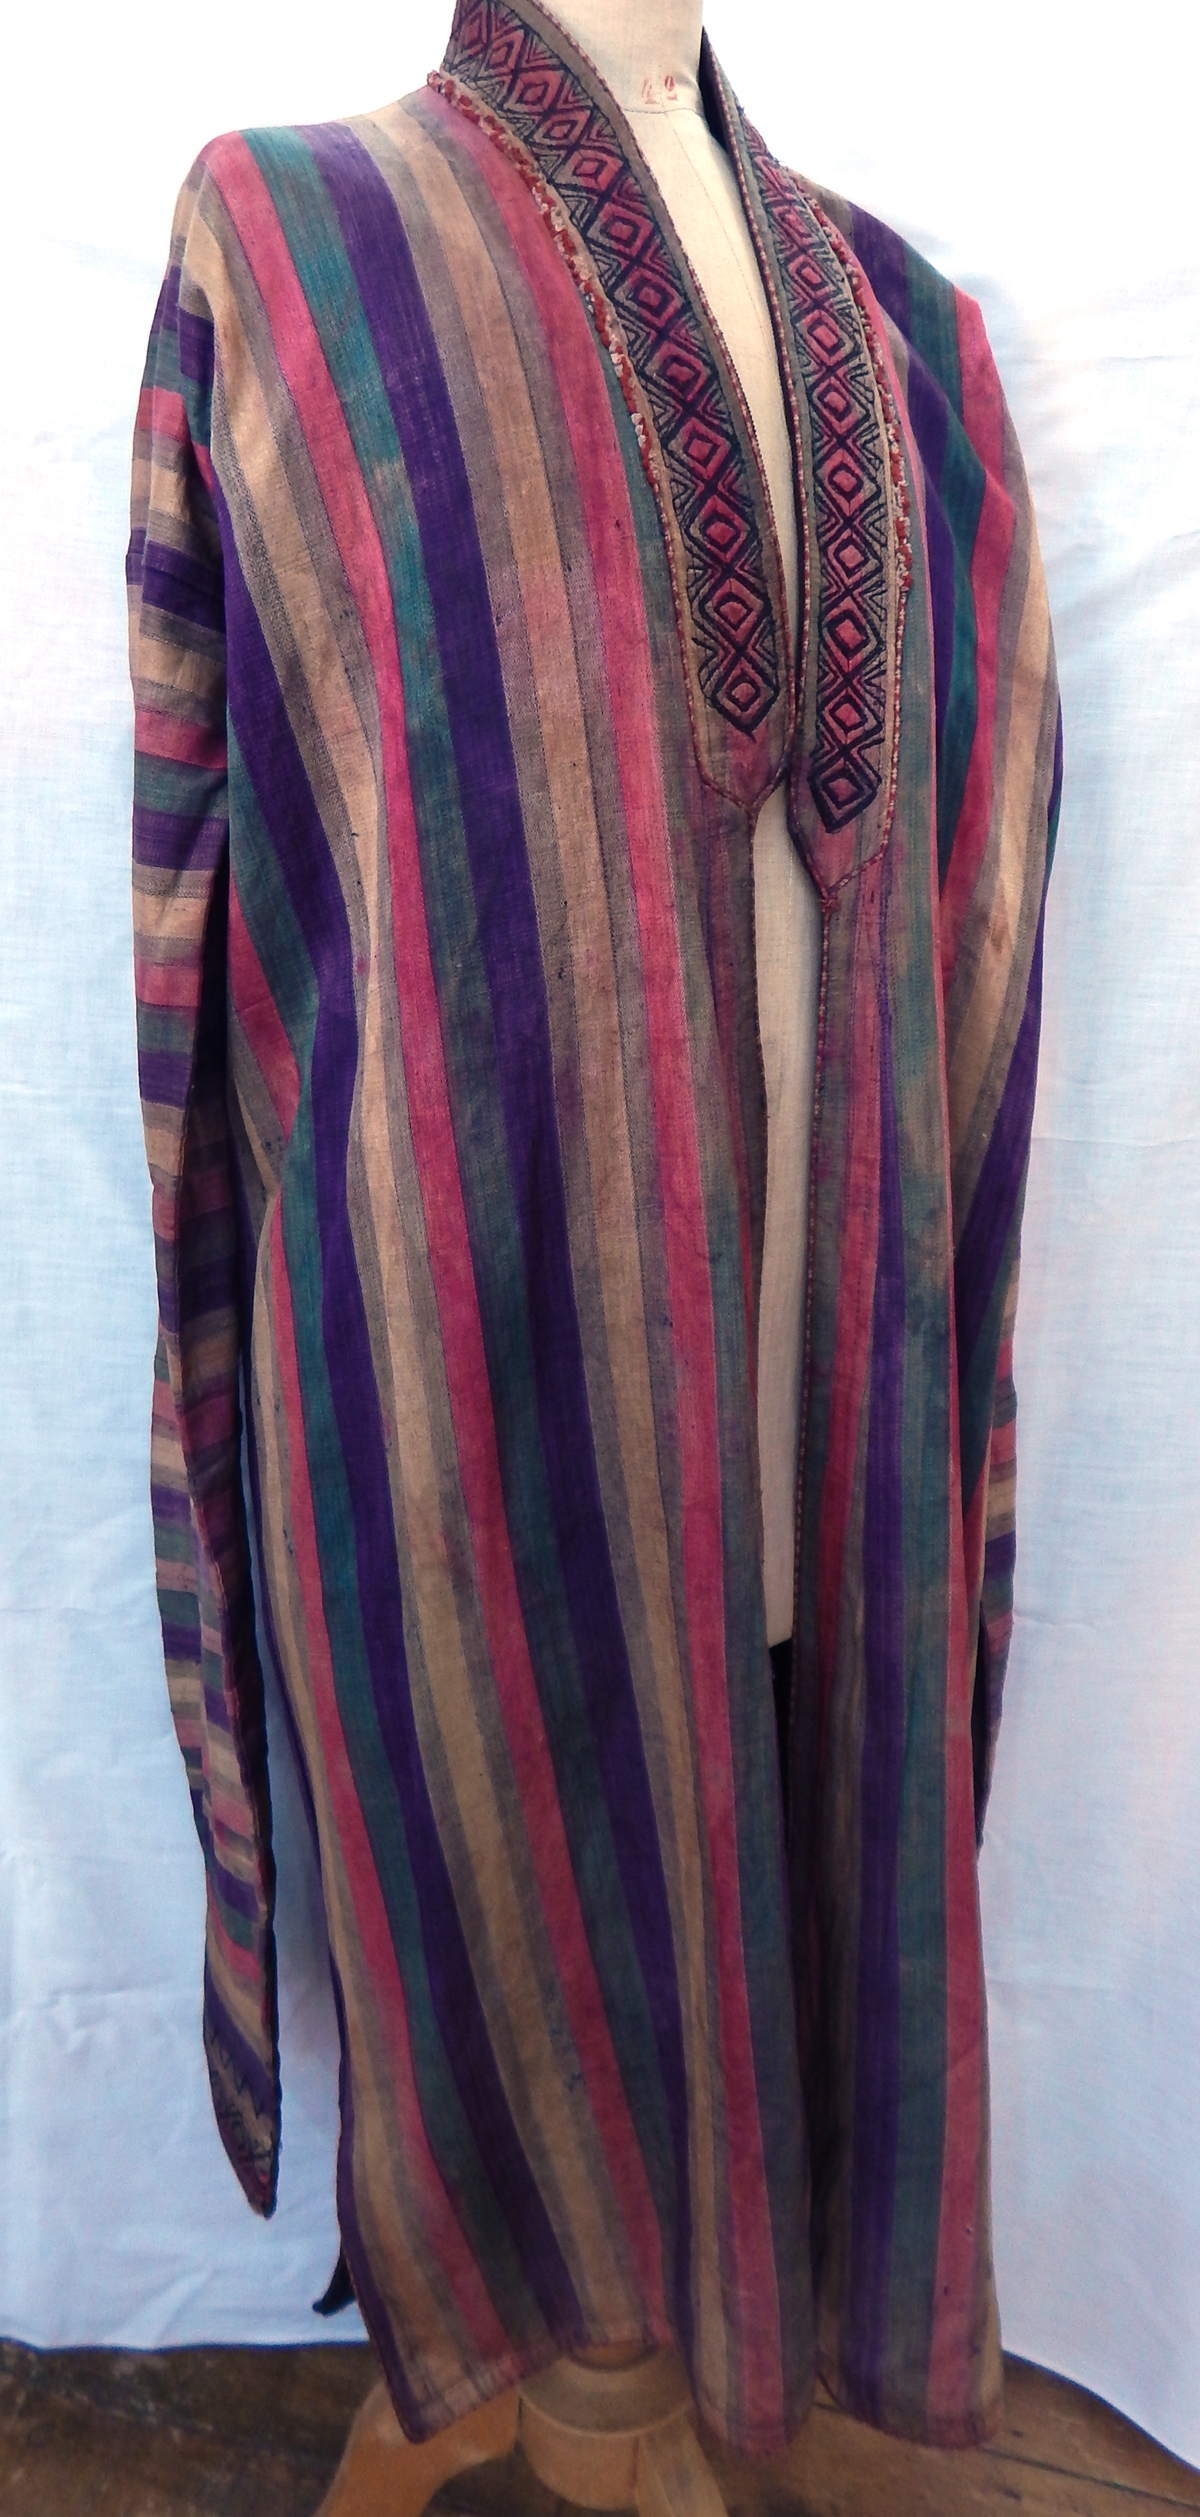 Central Asia - assorted robes and cloaks. - Image 4 of 7